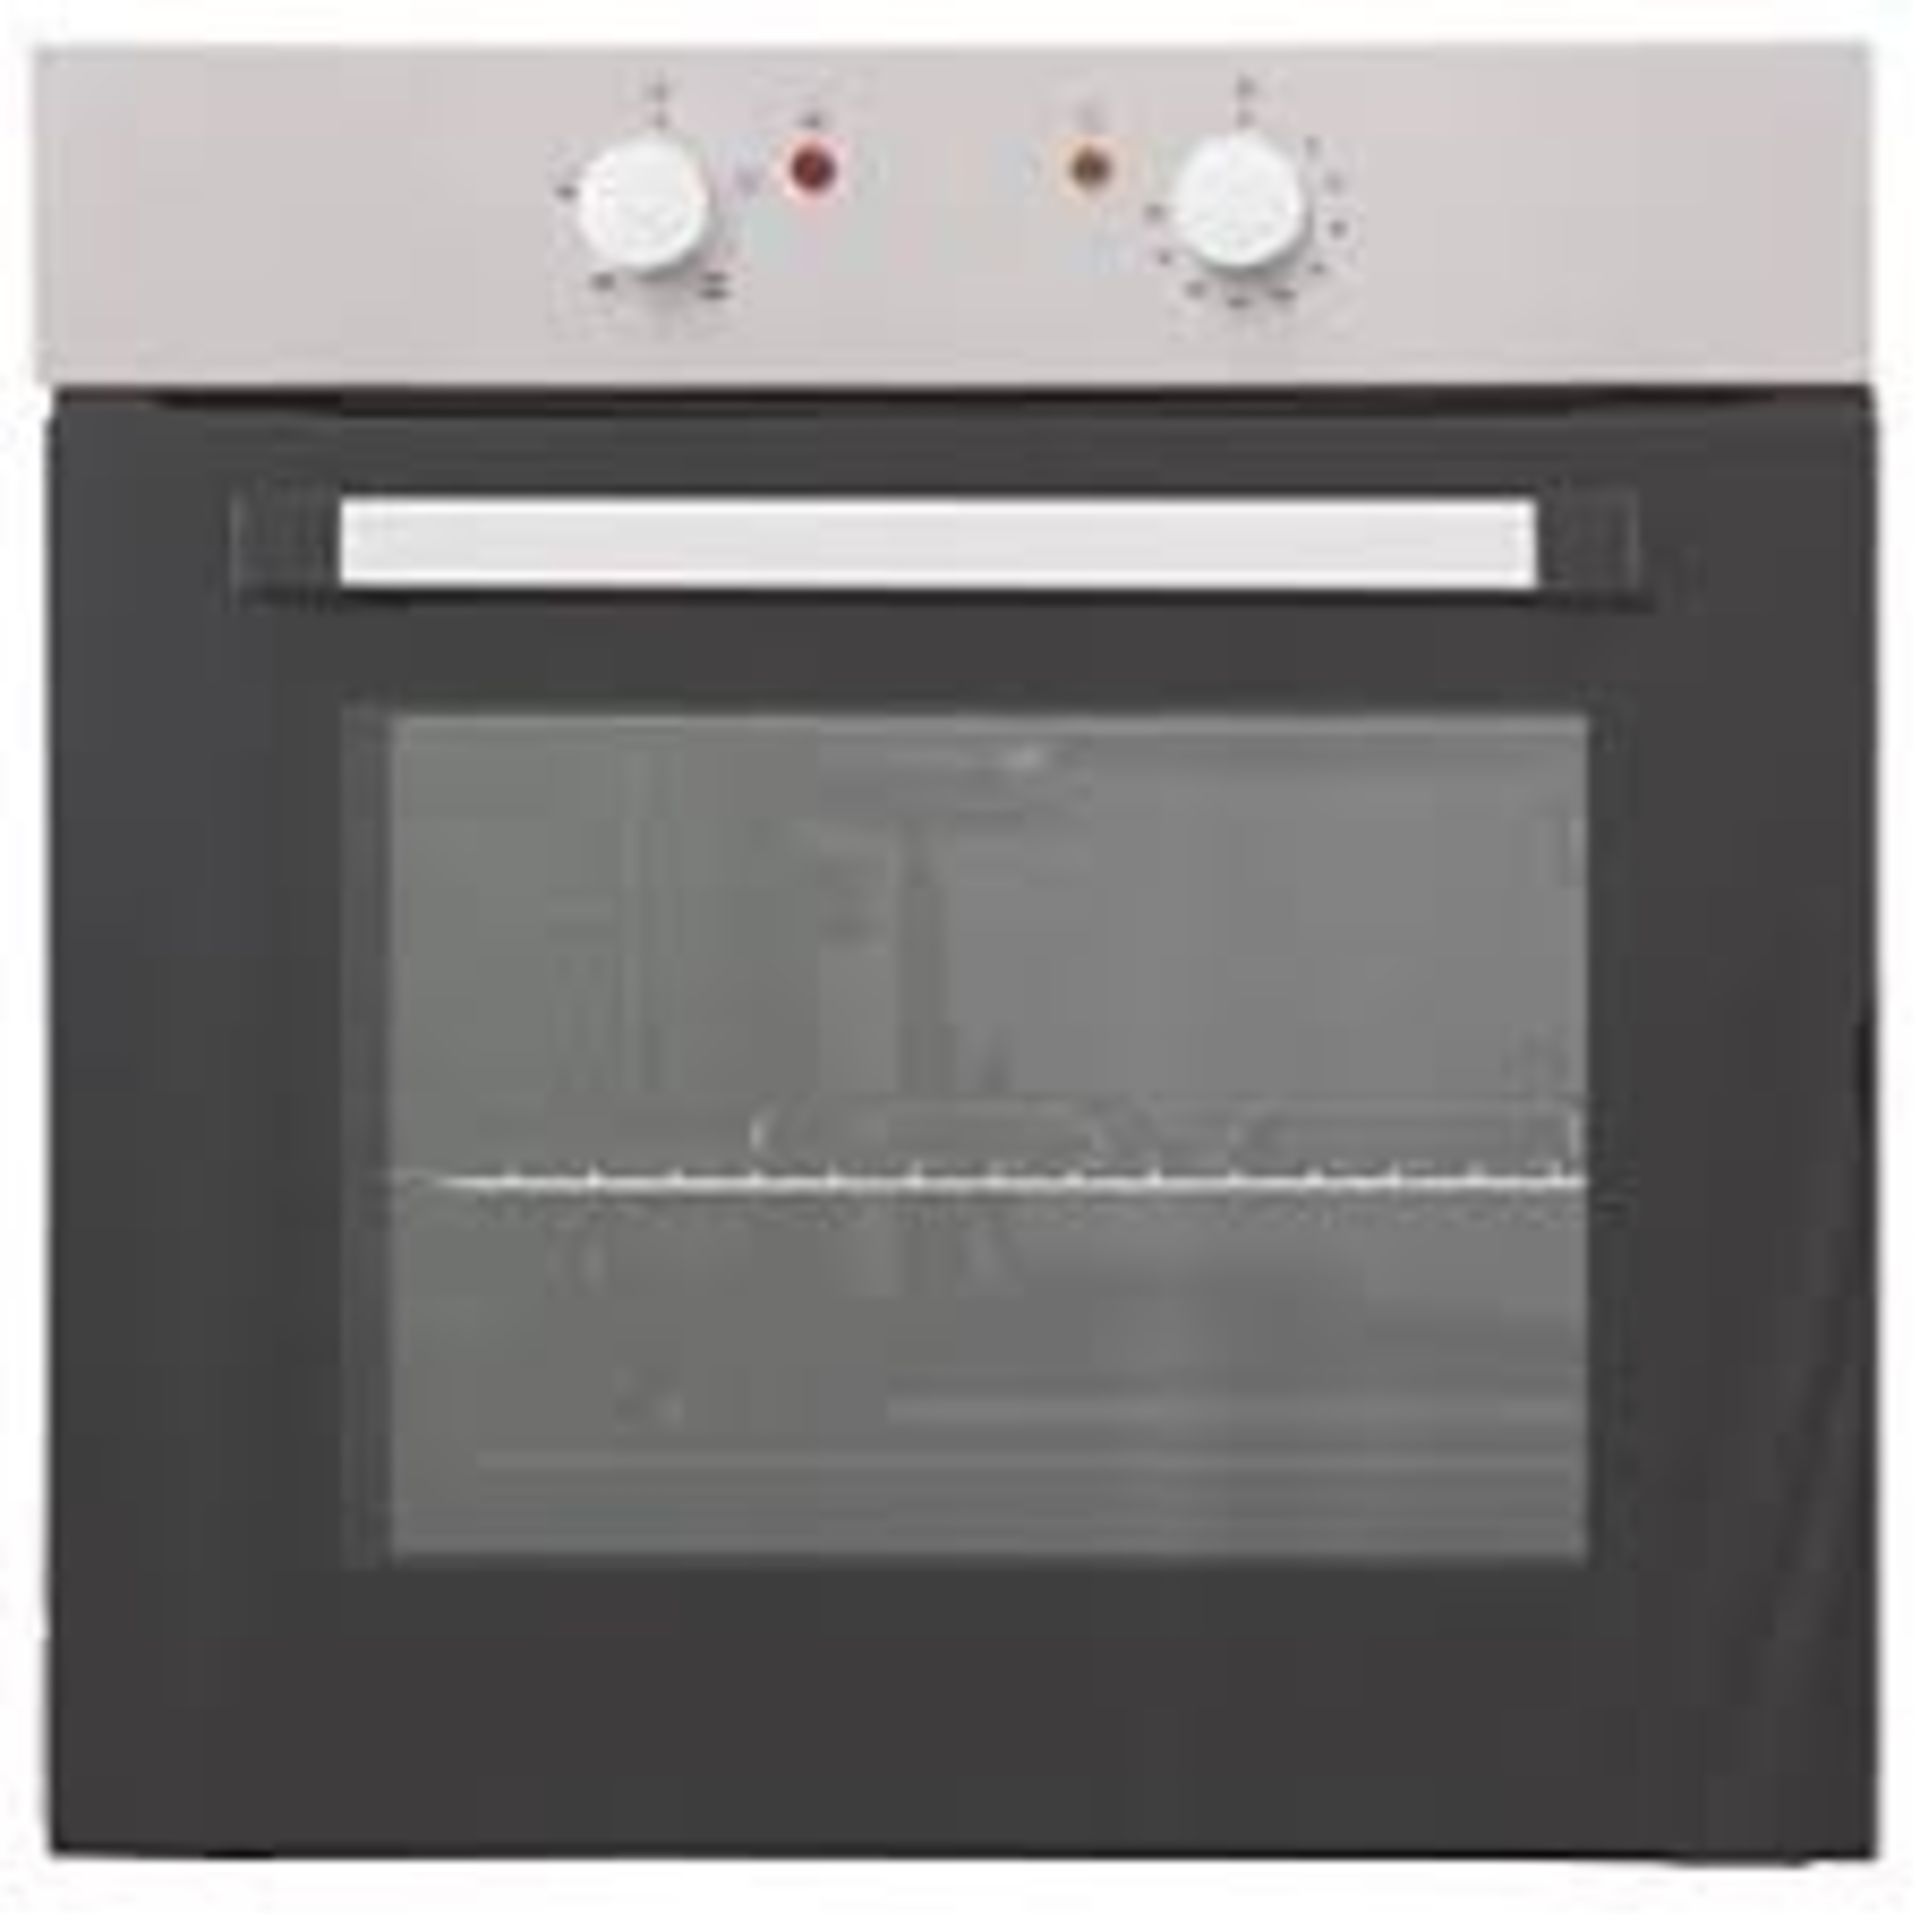 COOKE & LEWIS BUILT- IN SINGLE ELECTRIC OVEN STAINLESS STEEL 595MM X 595MM (. - R13a.4.